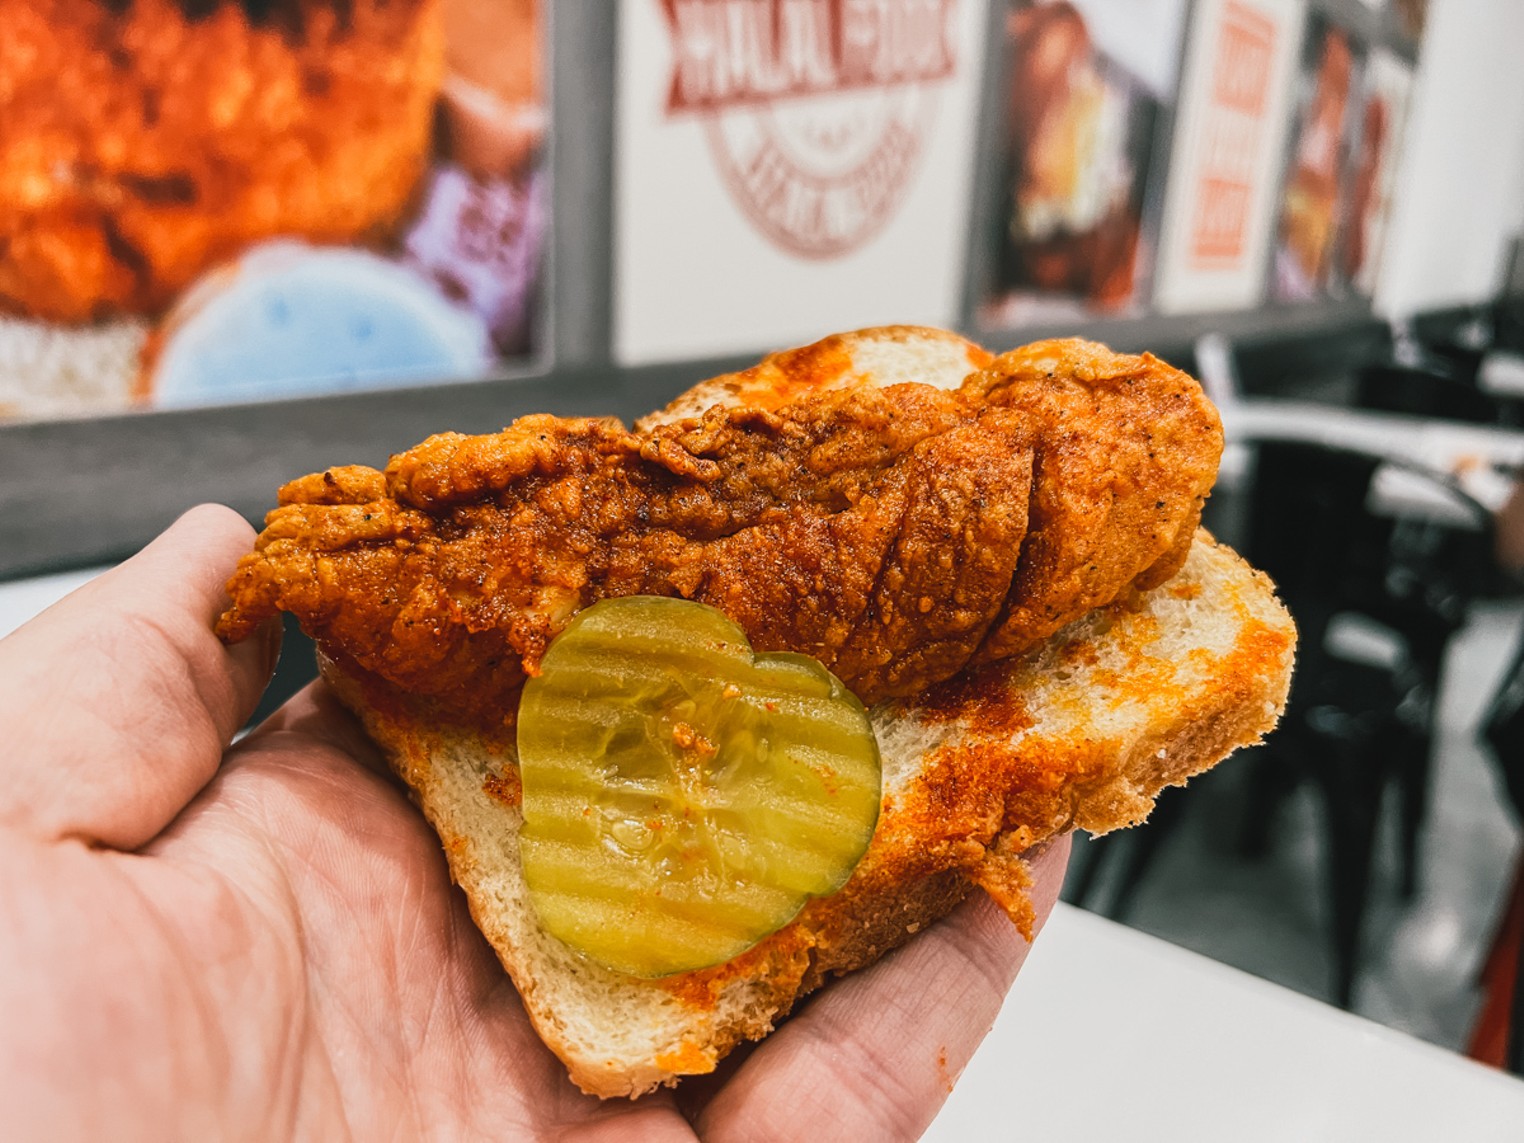 Crimson Coward Serves Up Nashville Hot Chicken With A Couple Of Twists